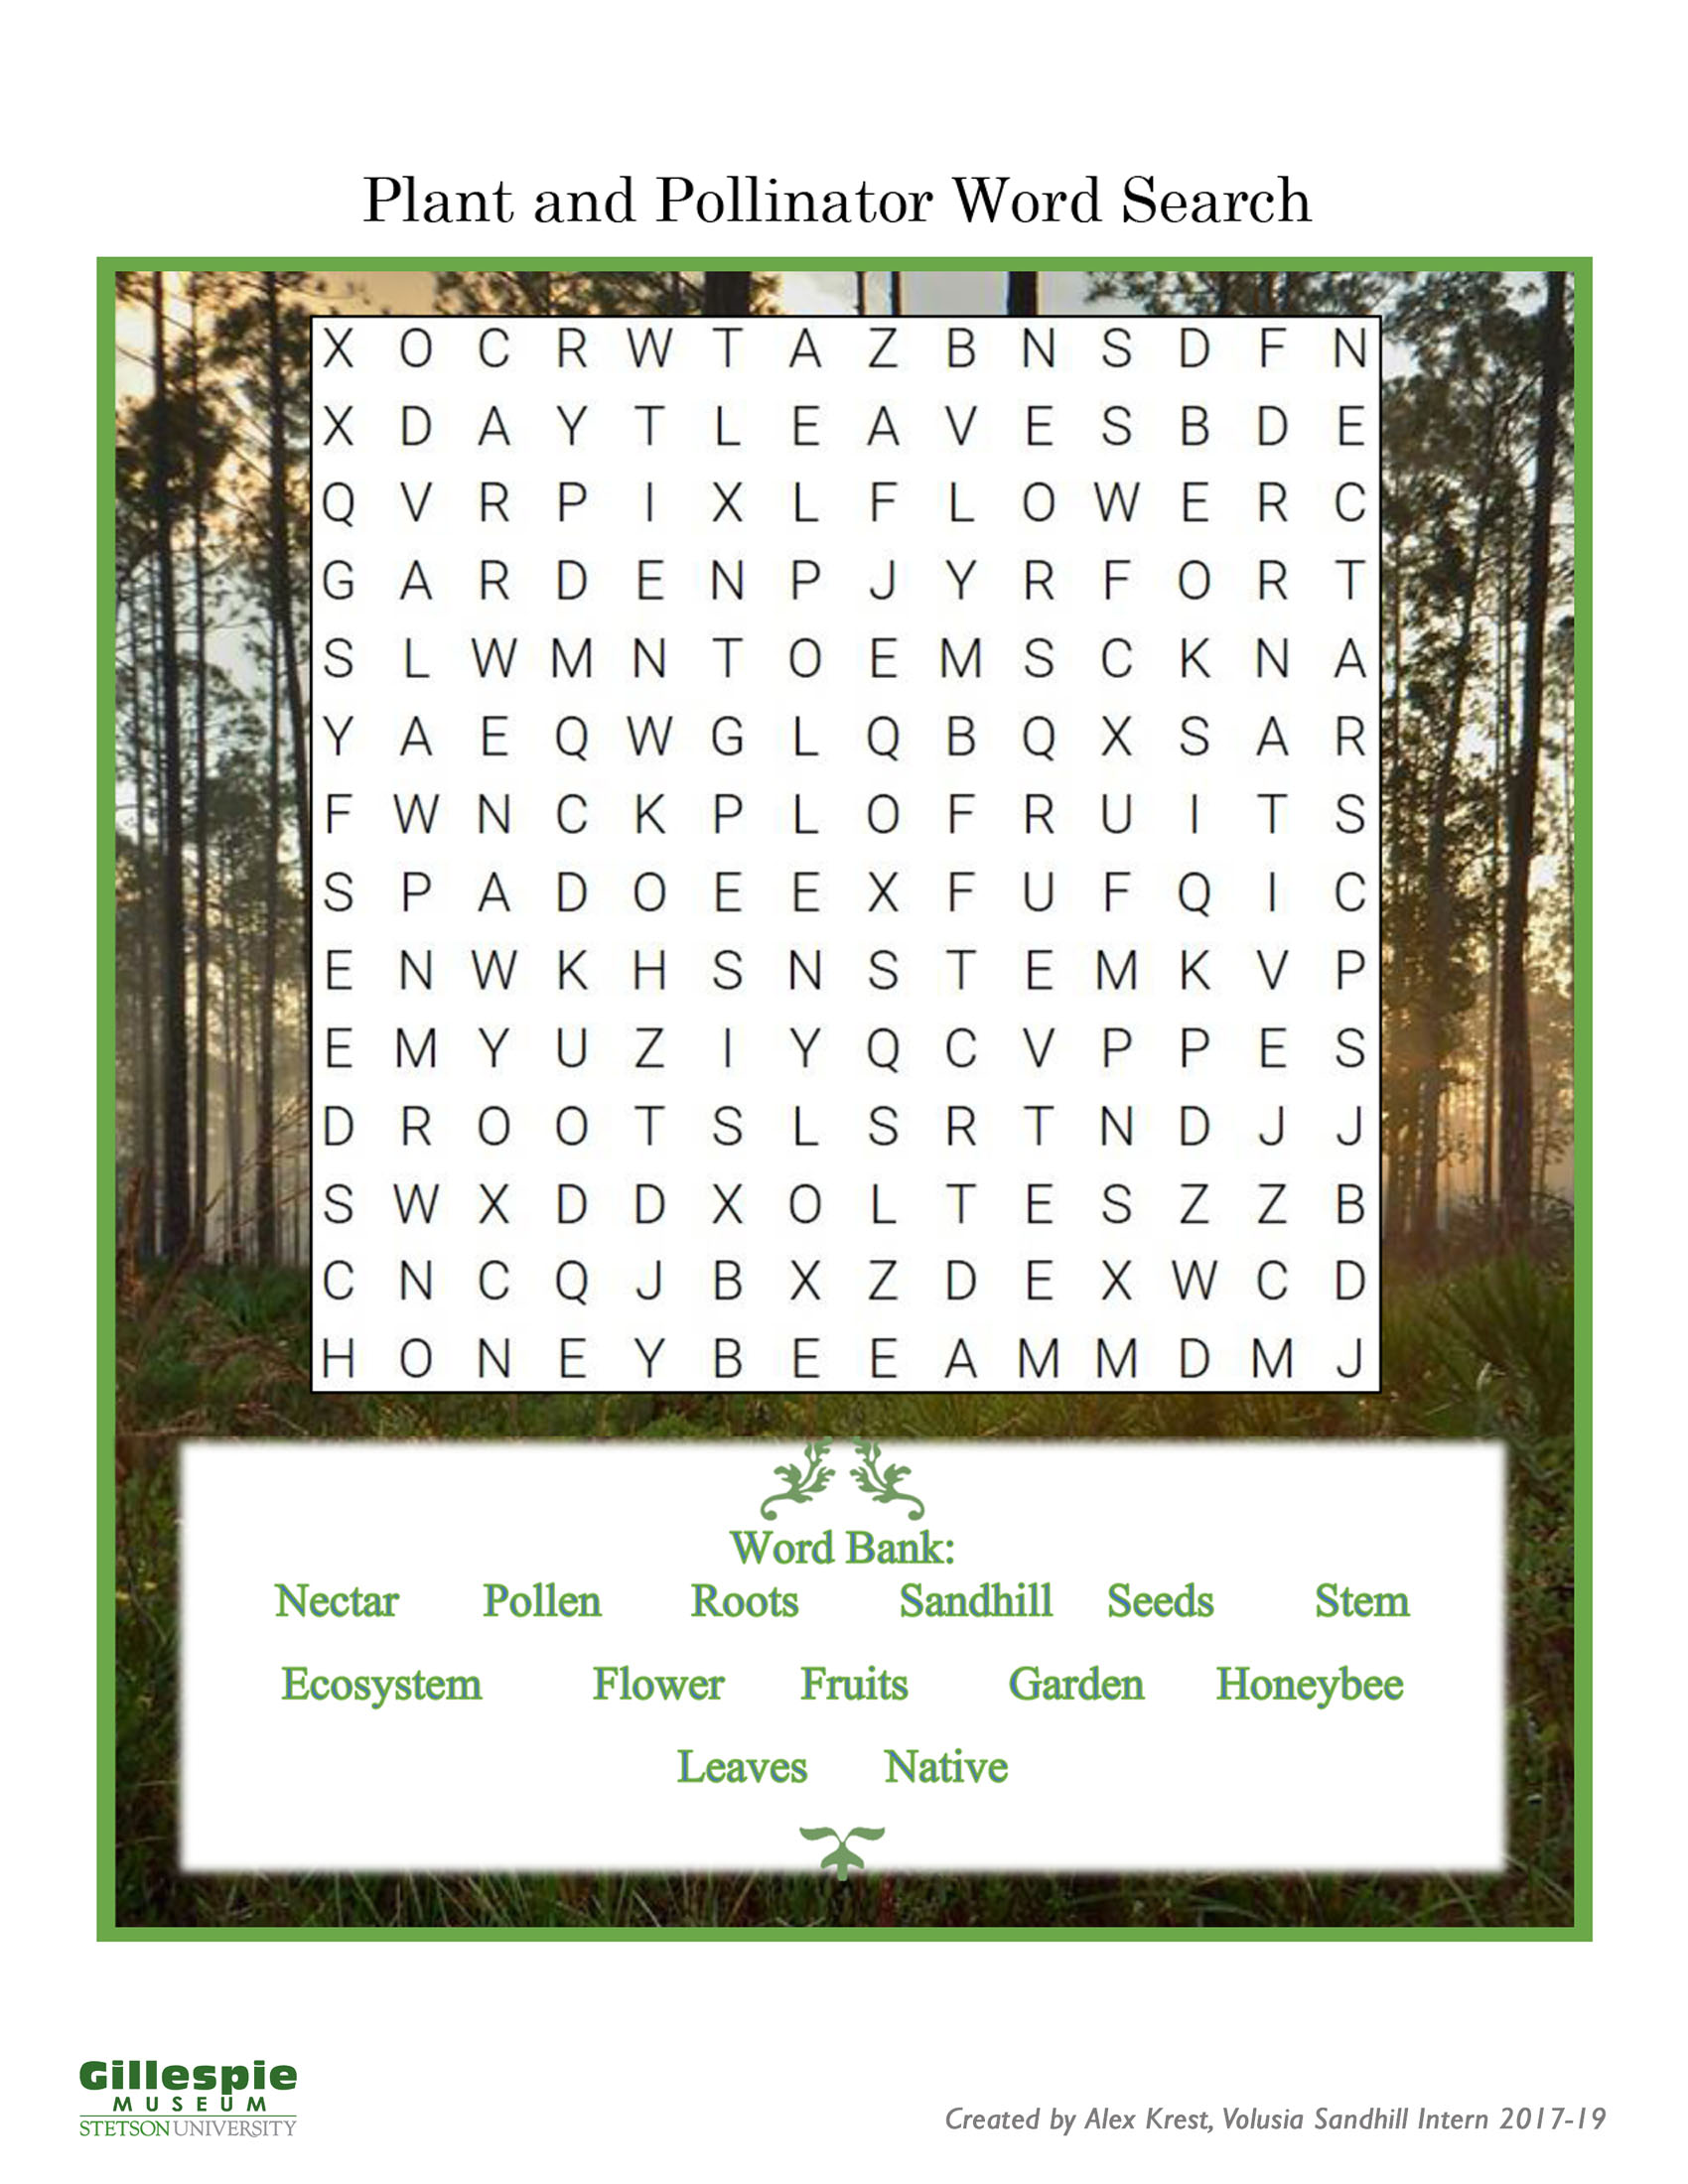 pollination word search